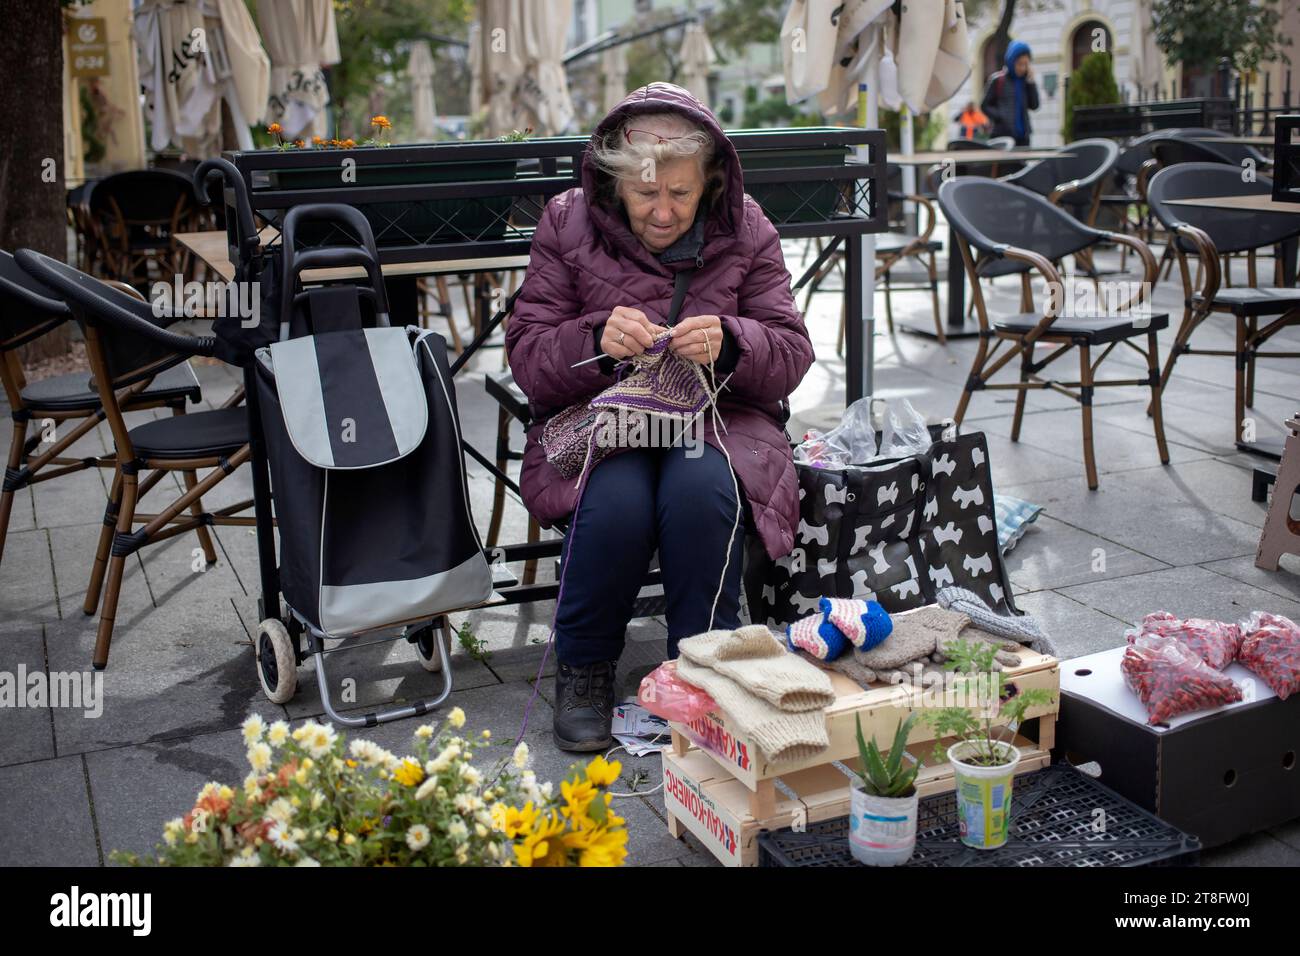 Belgrade, Serbia, Nov 10, 2023: An elderly lady sells flowers, gloves and socks on the improvised street stall while knitting Stock Photo